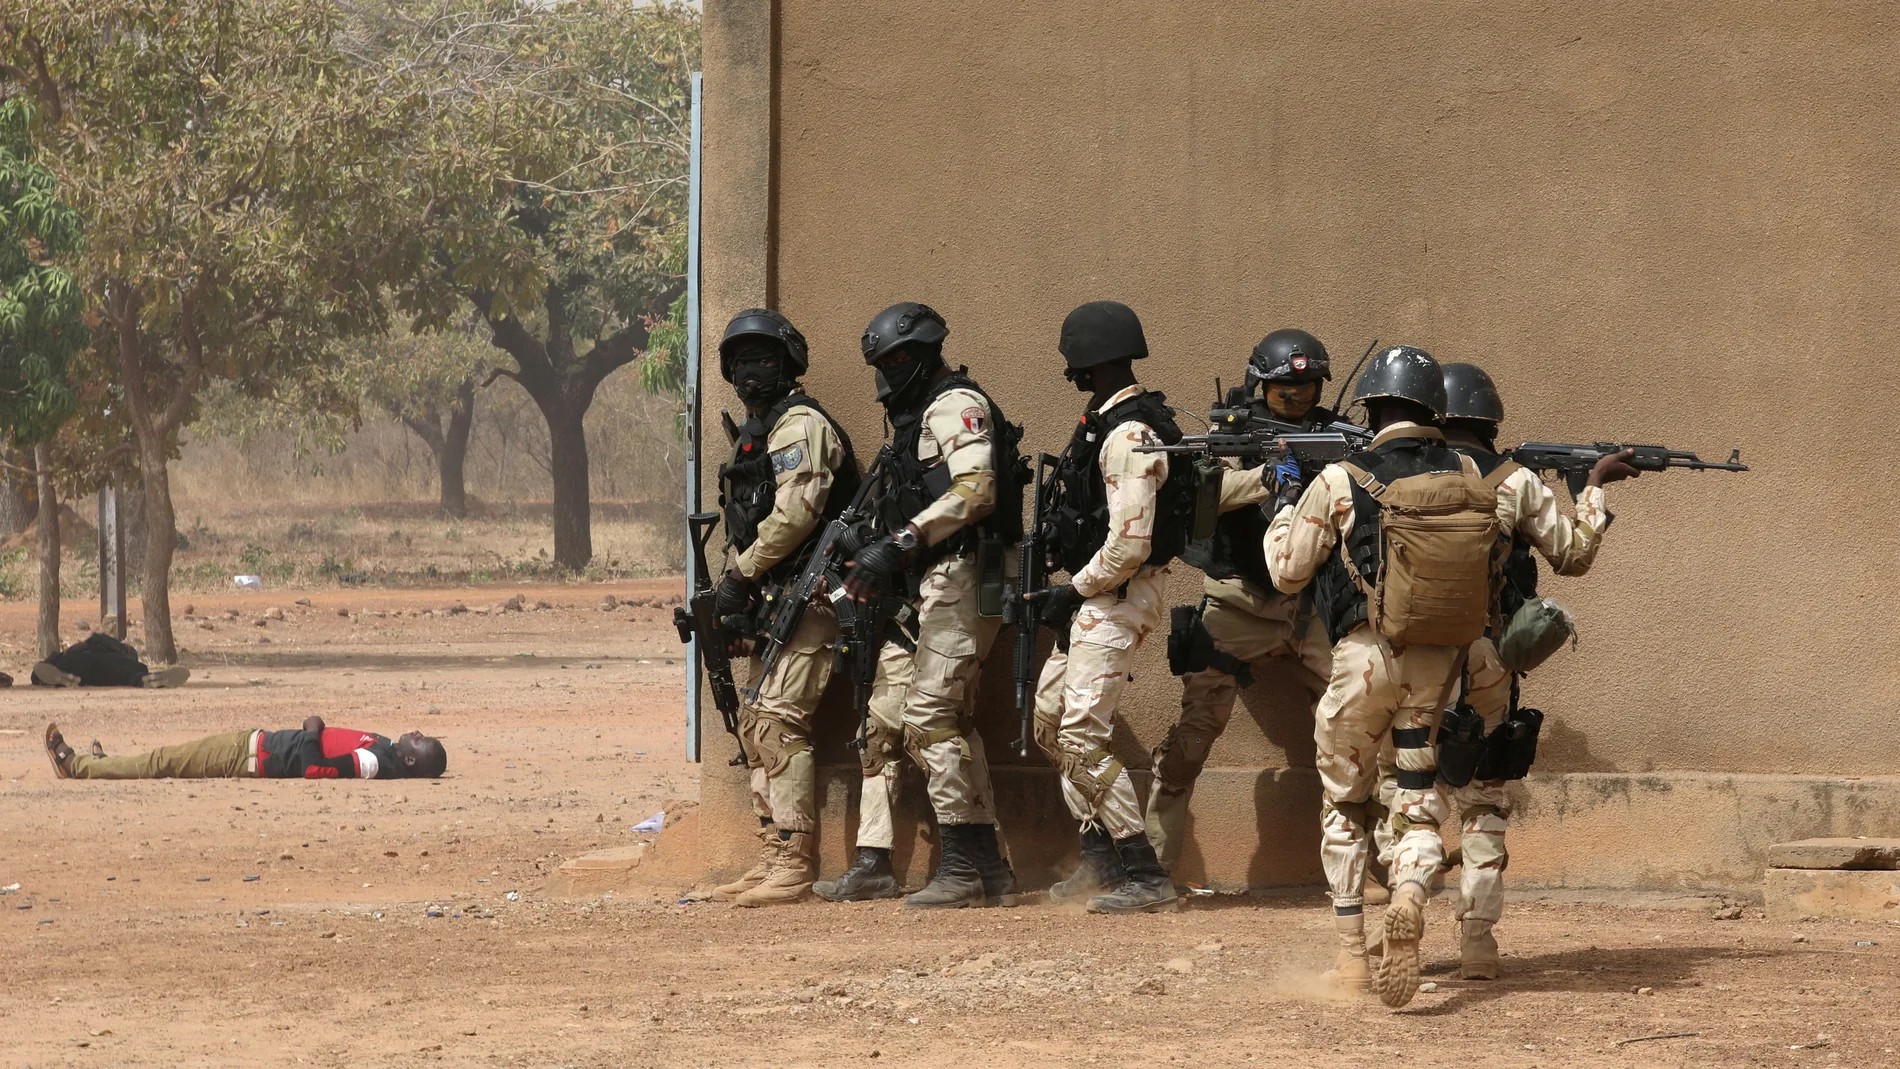 Soldiers from Burkina Faso participate in a simulated raid during the U.S. sponsored Flintlock exercises in Ouagadougou, Burkina Faso